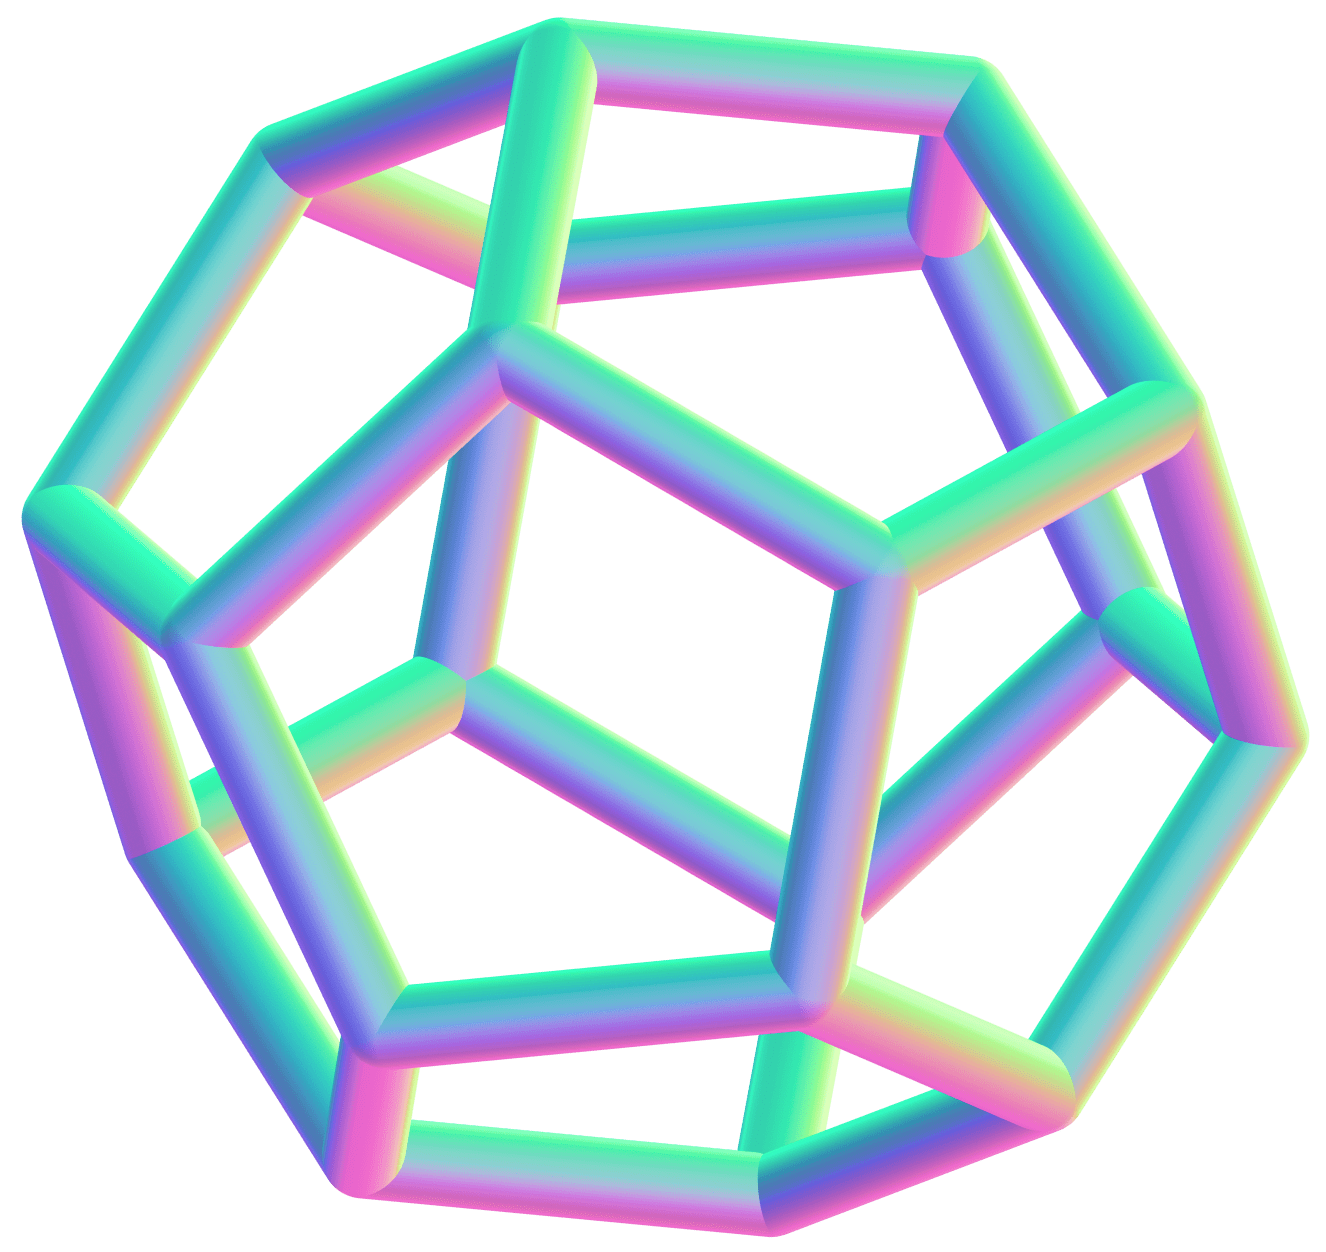 Dodecahedron image